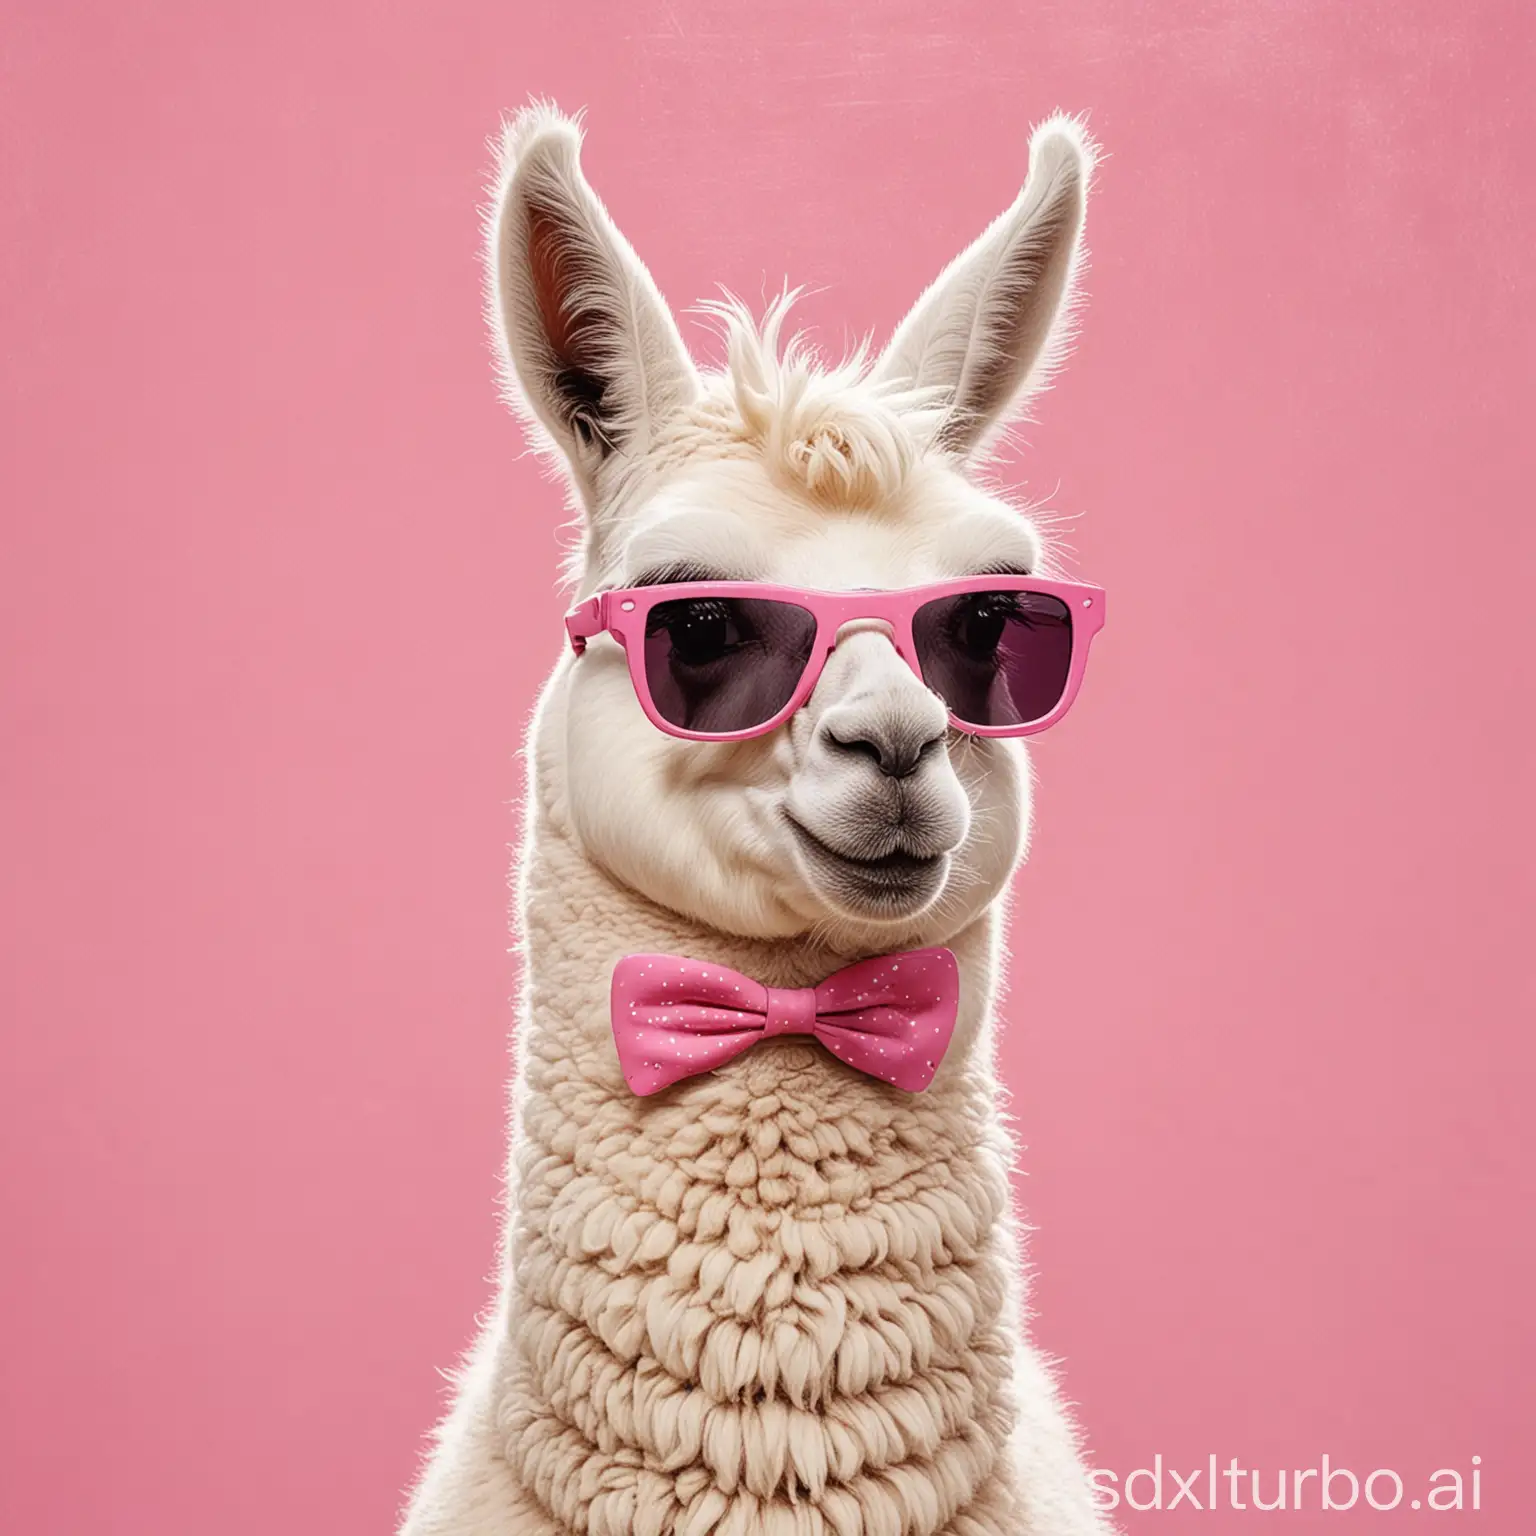 Cool-White-Llama-Wearing-Sunglasses-Paints-on-Pink-Canvas